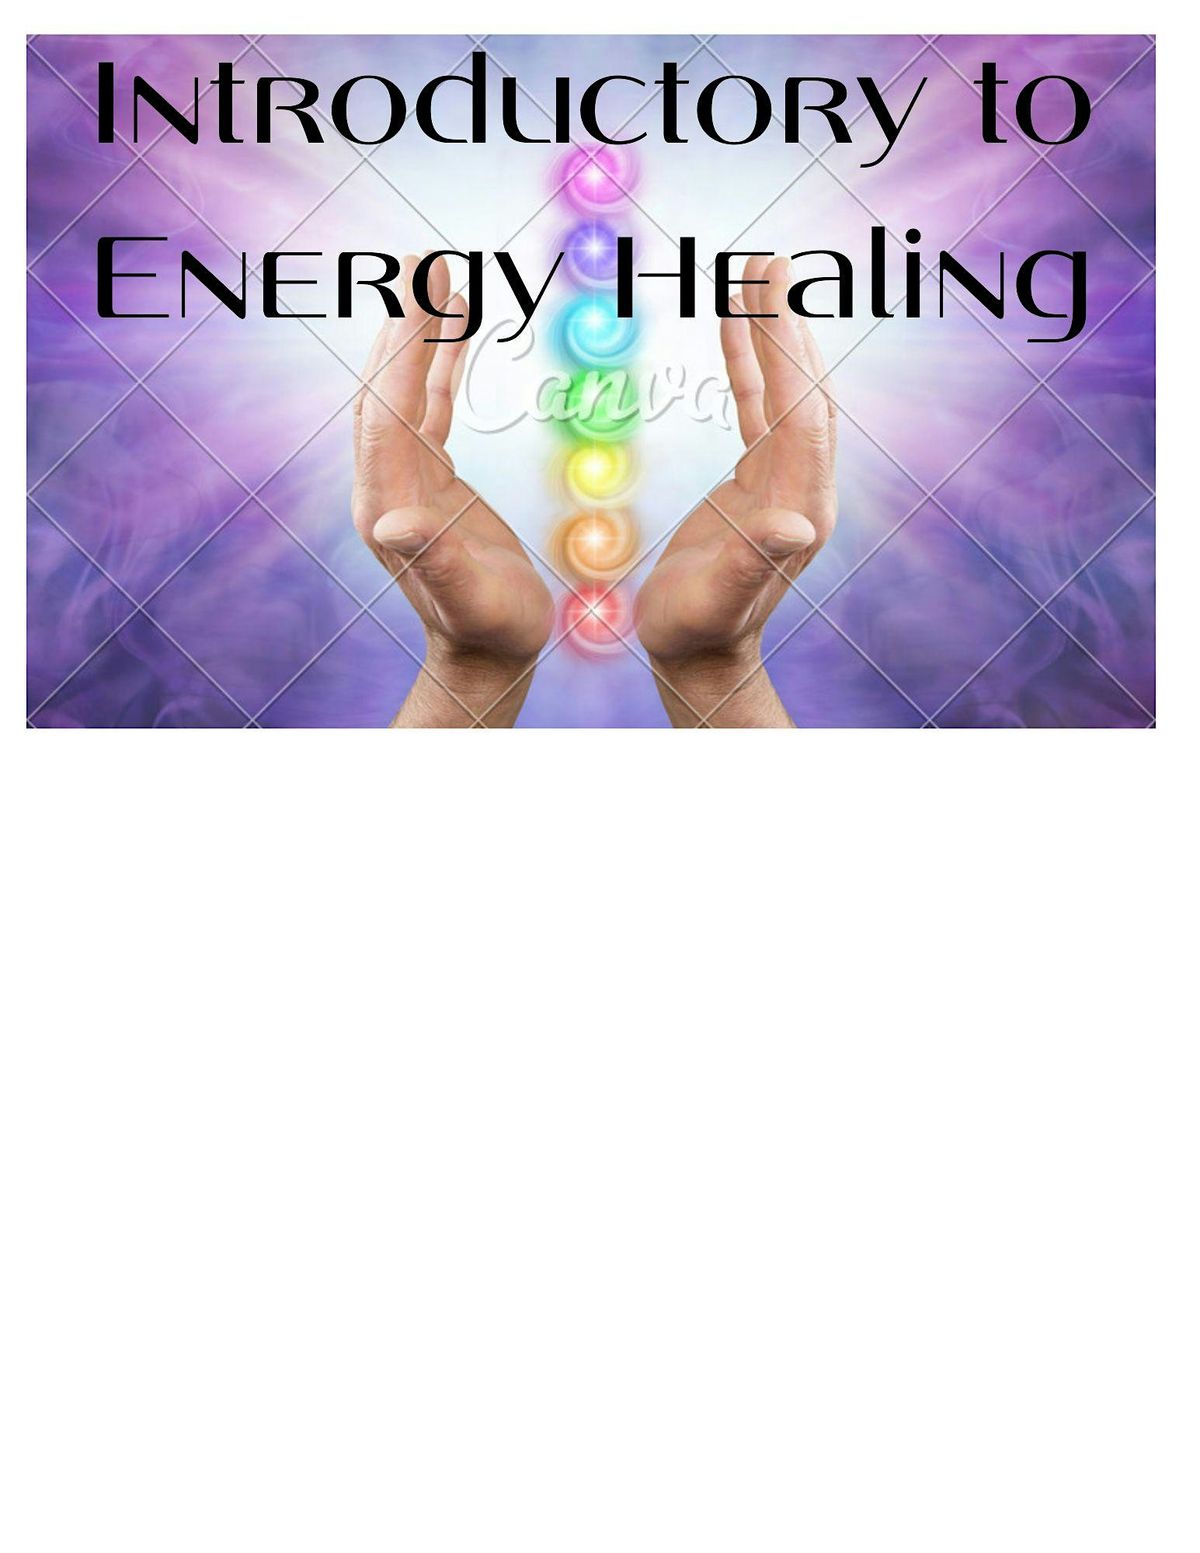 Introductory to Energy Healing